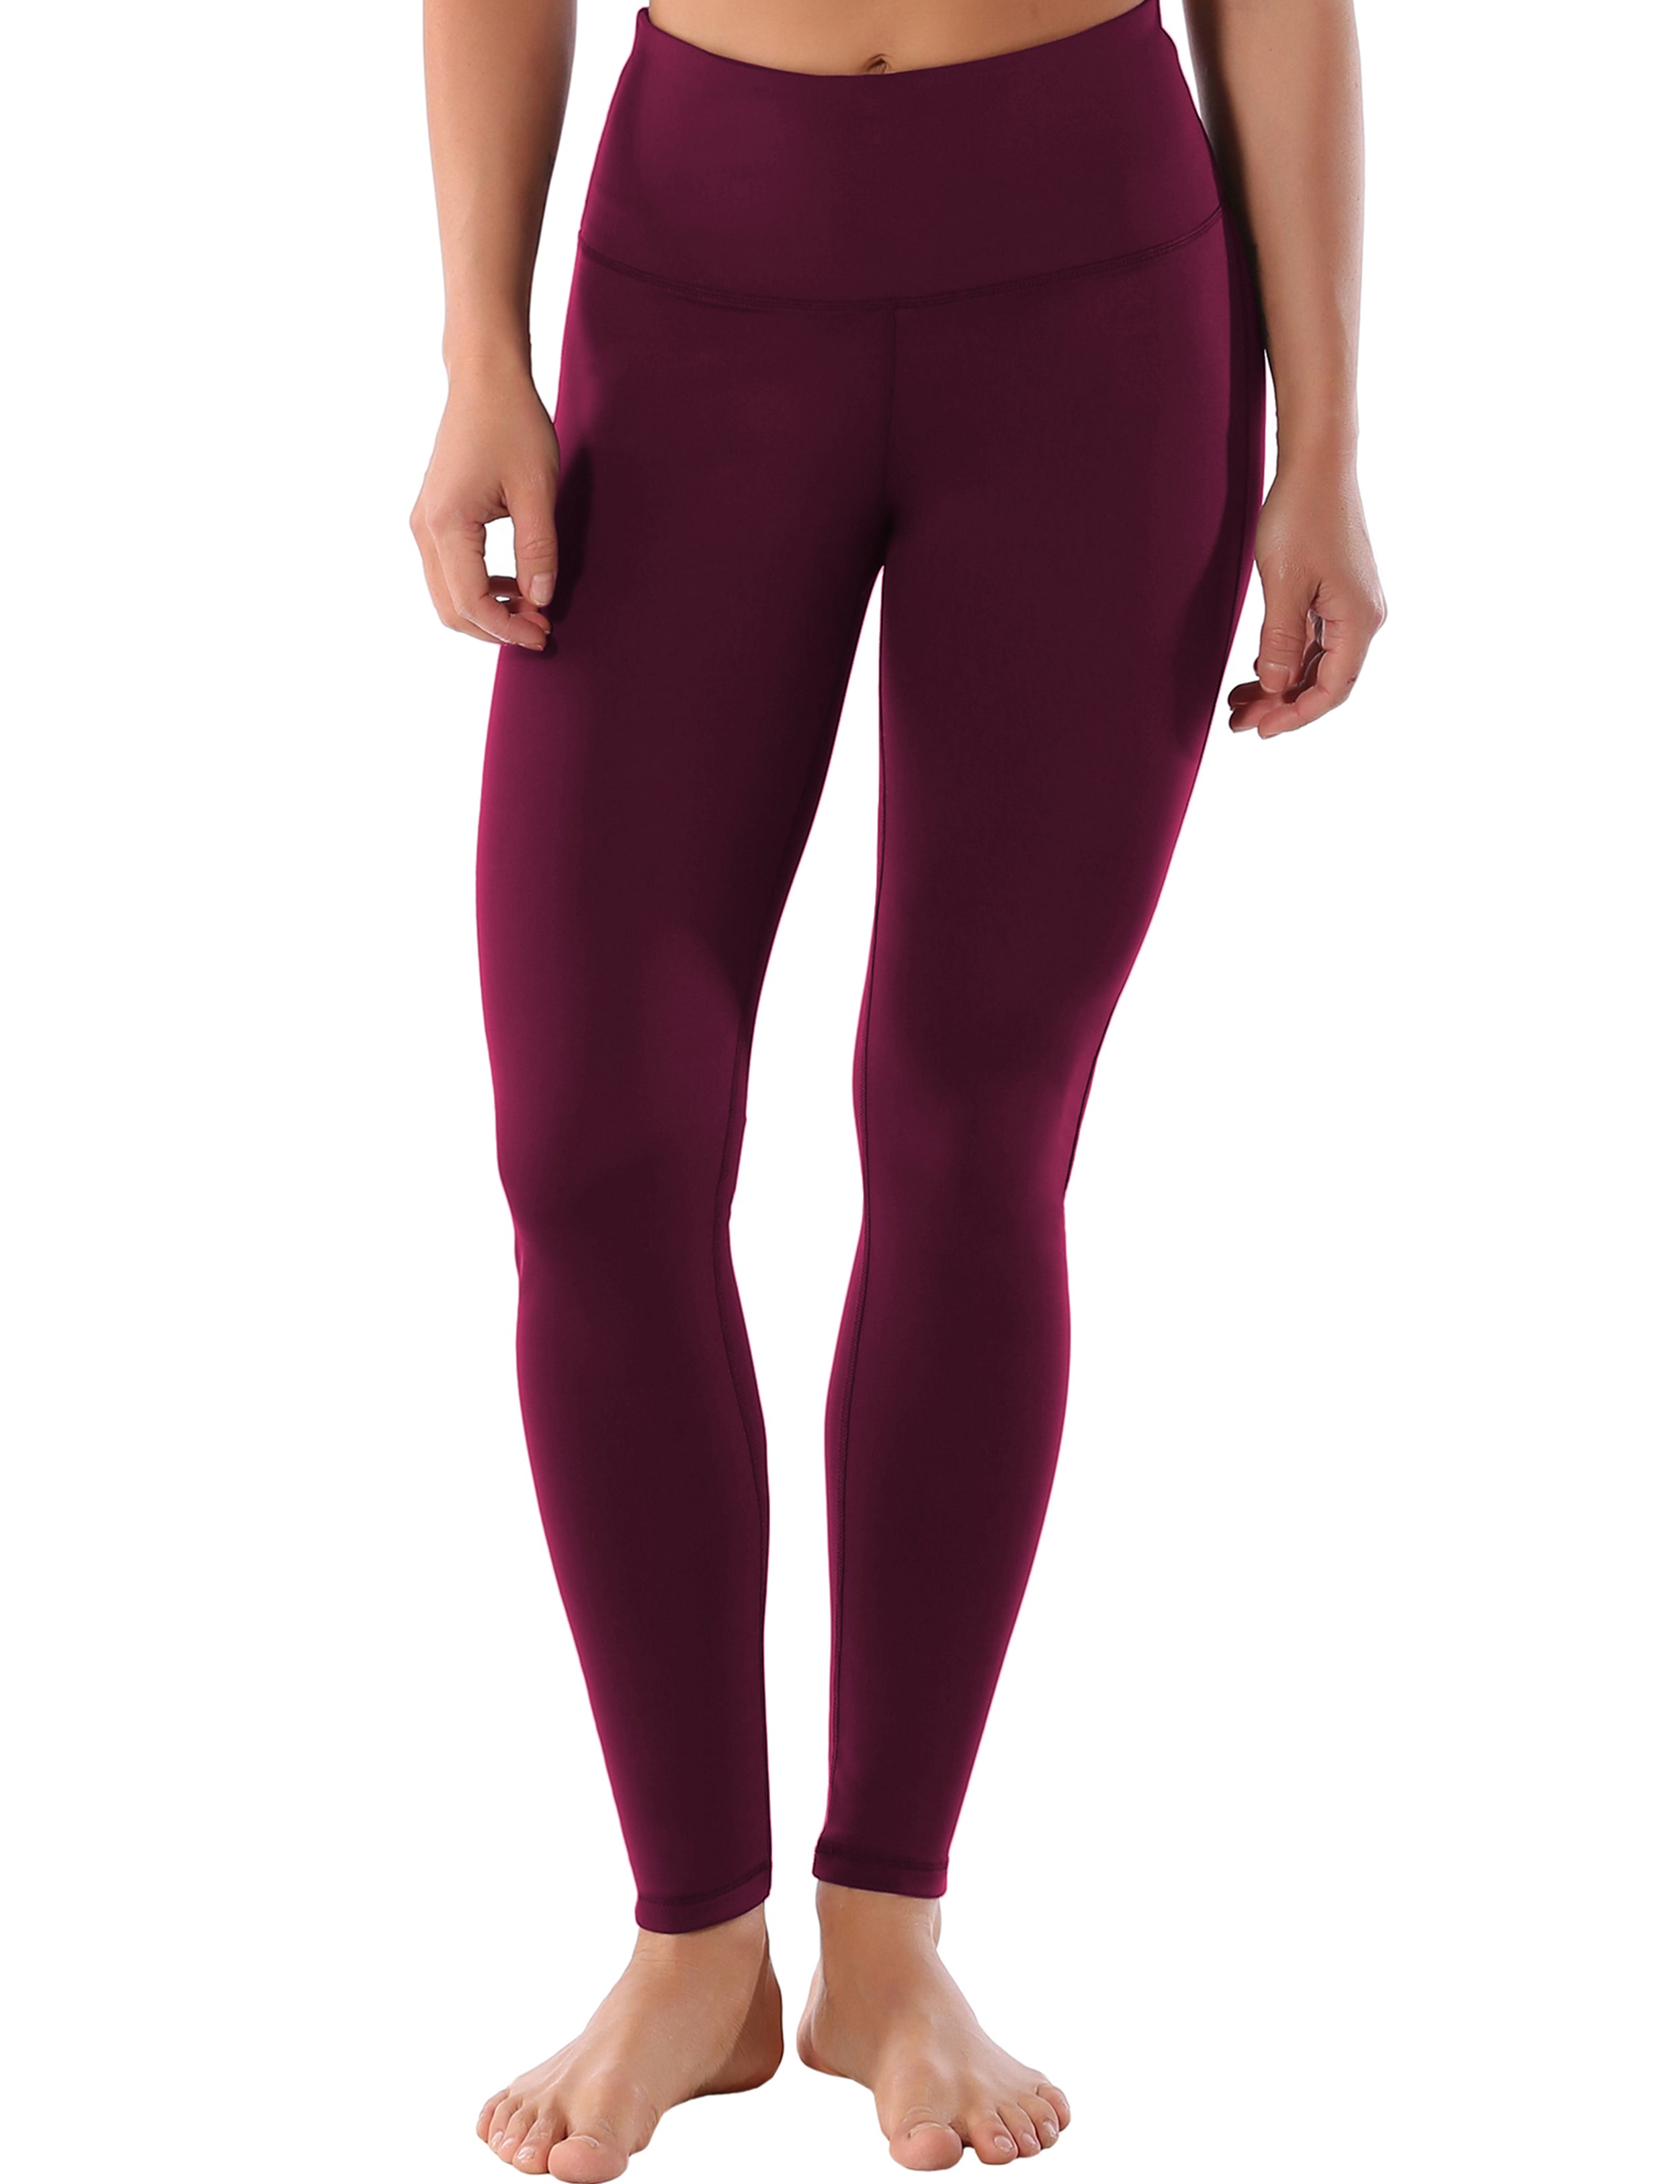 High Waist Side Line Jogging Pants grapevine Side Line is Make Your Legs Look Longer and Thinner 75%Nylon/25%Spandex Fabric doesn't attract lint easily 4-way stretch No see-through Moisture-wicking Tummy control Inner pocket Two lengths